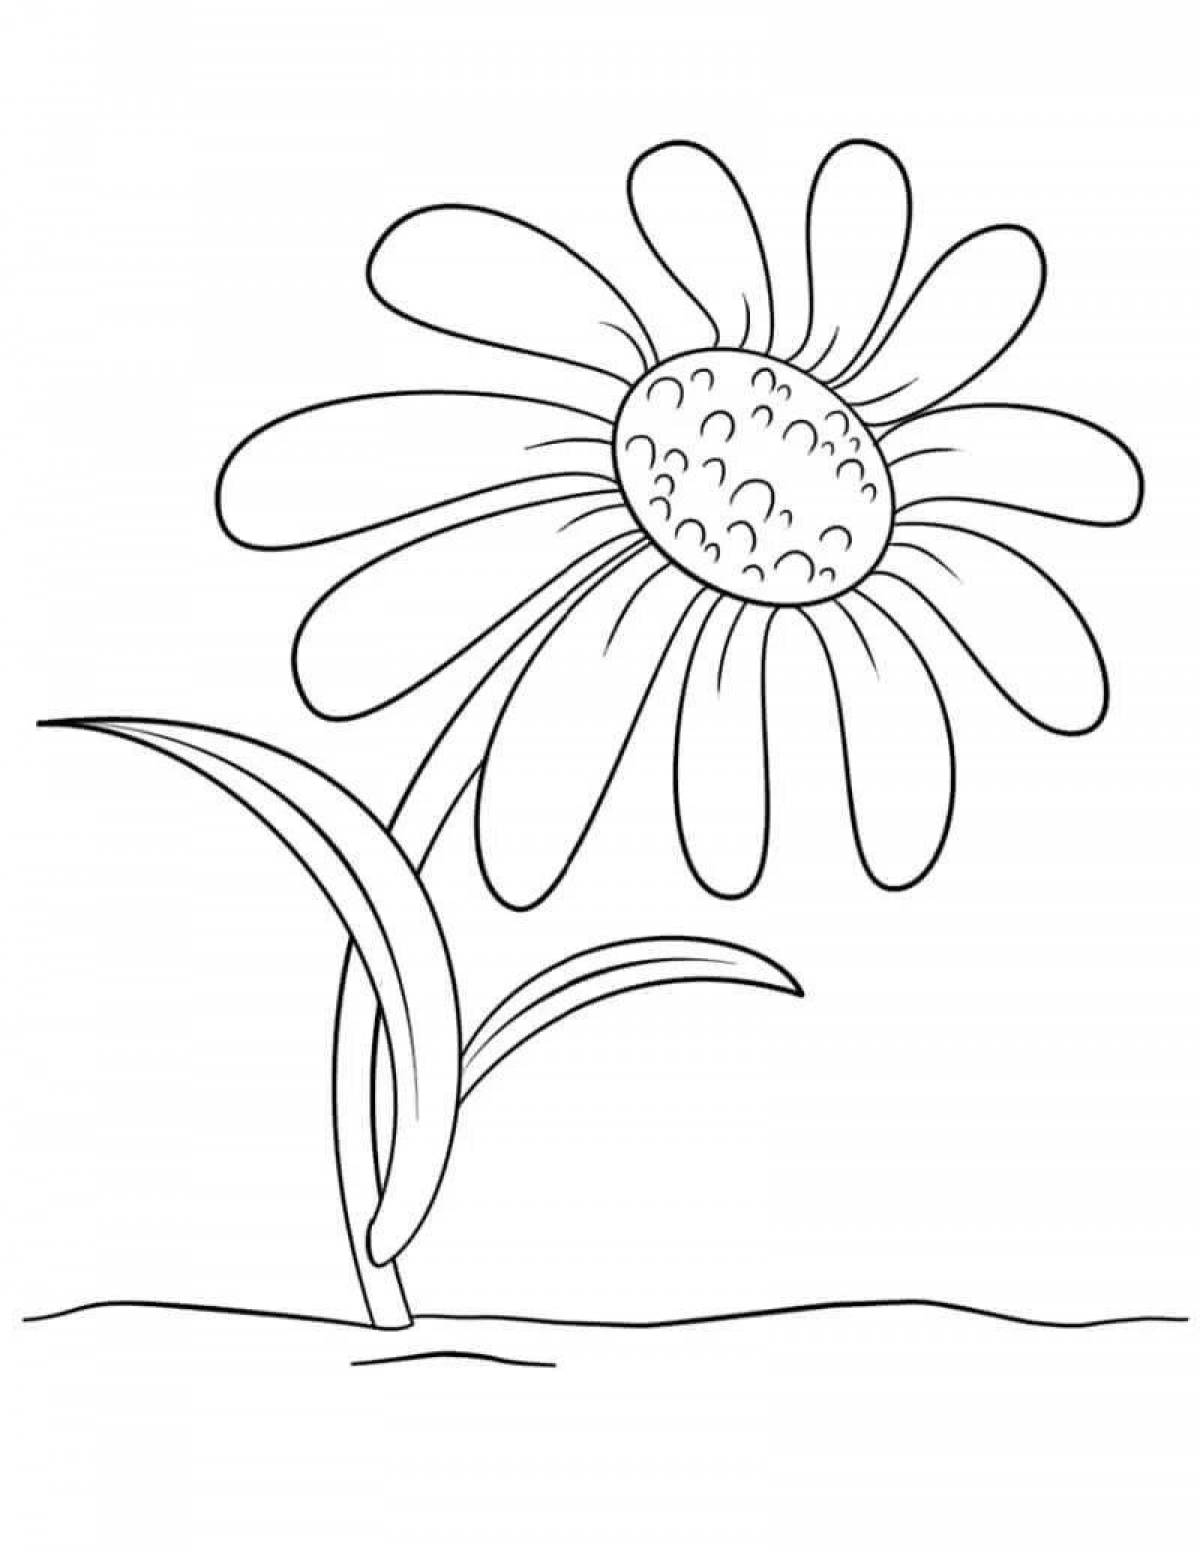 A fun coloring book for preschoolers with daisies